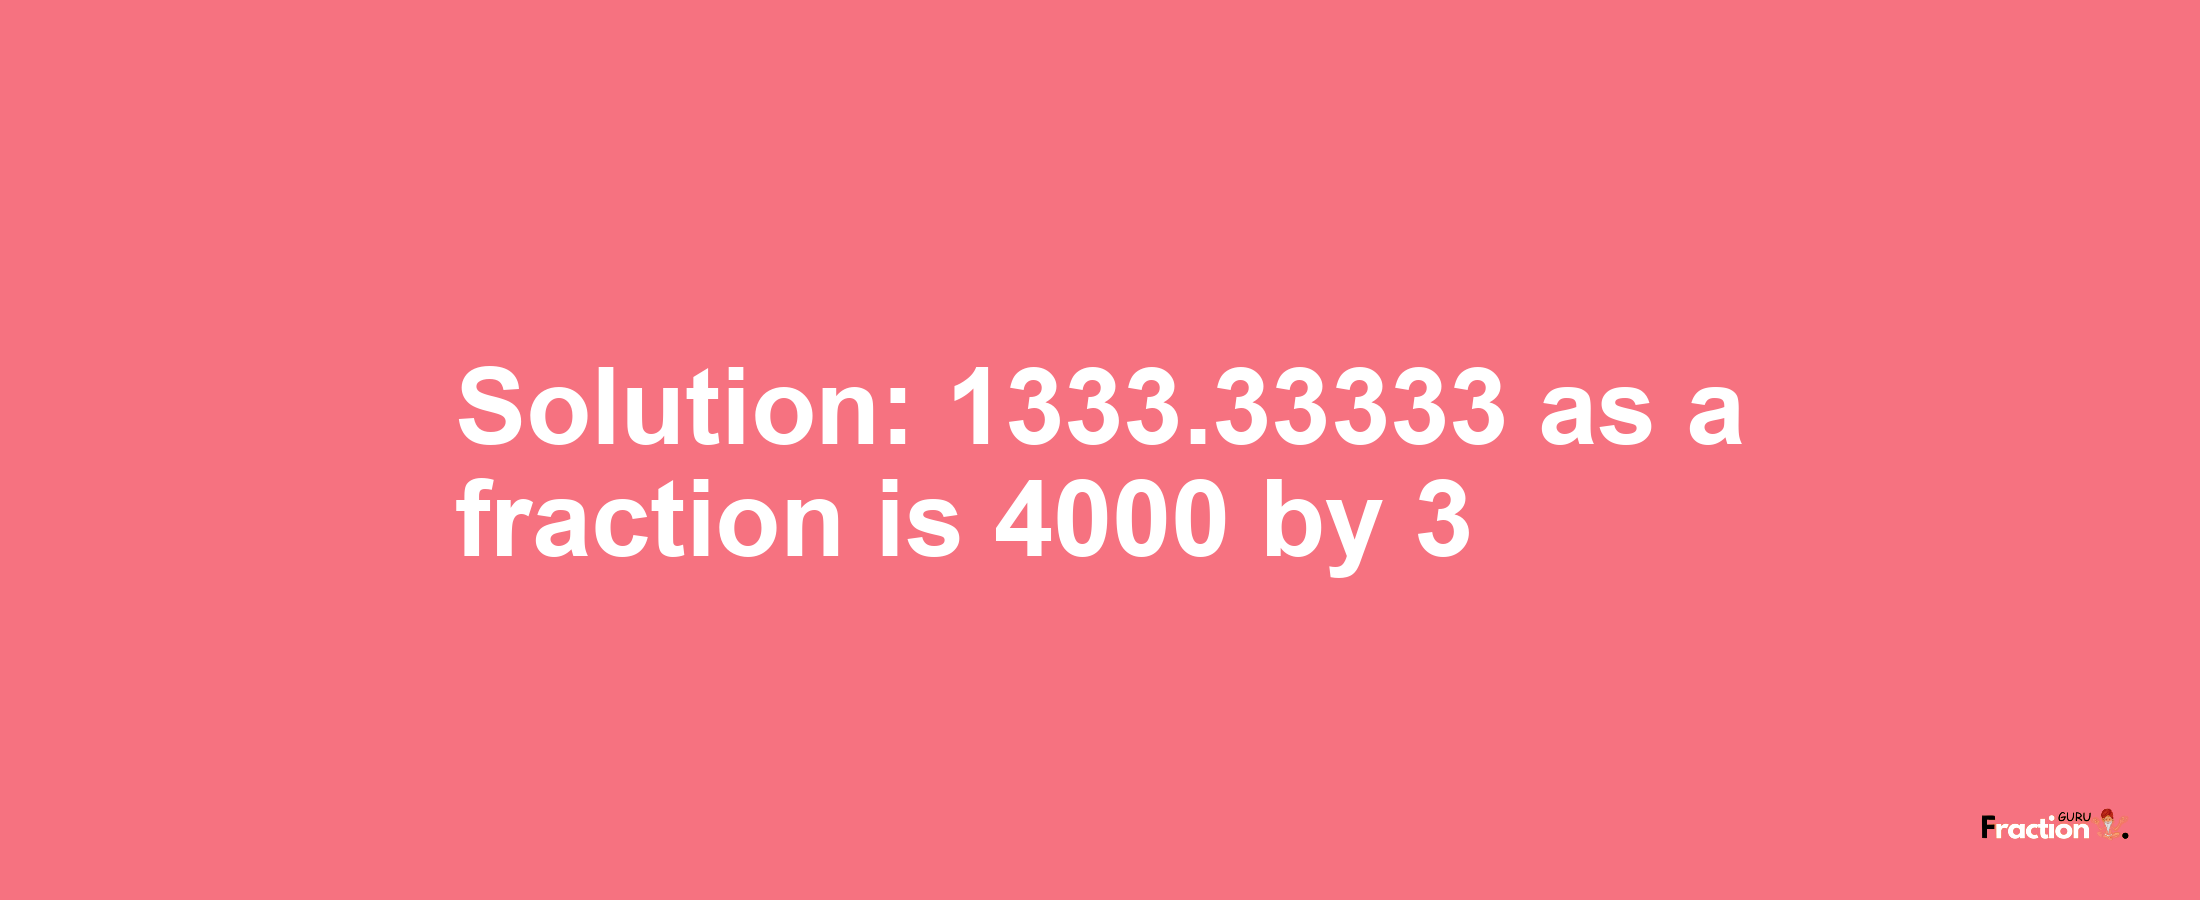 Solution:1333.33333 as a fraction is 4000/3